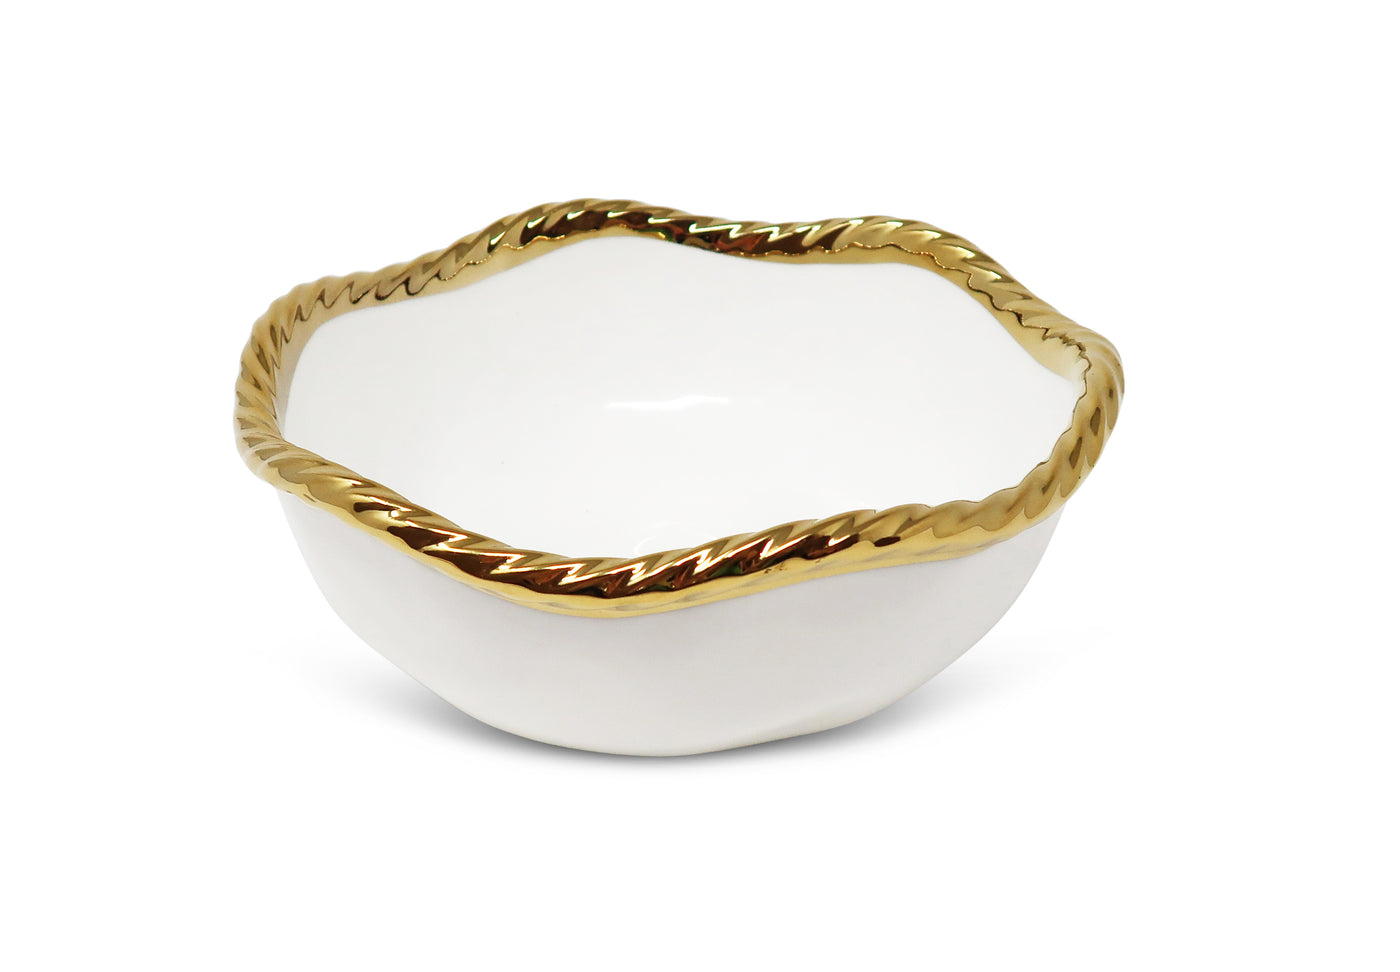 Set of 4 White Soup Bowls New Bone China with Gold Rope Edge